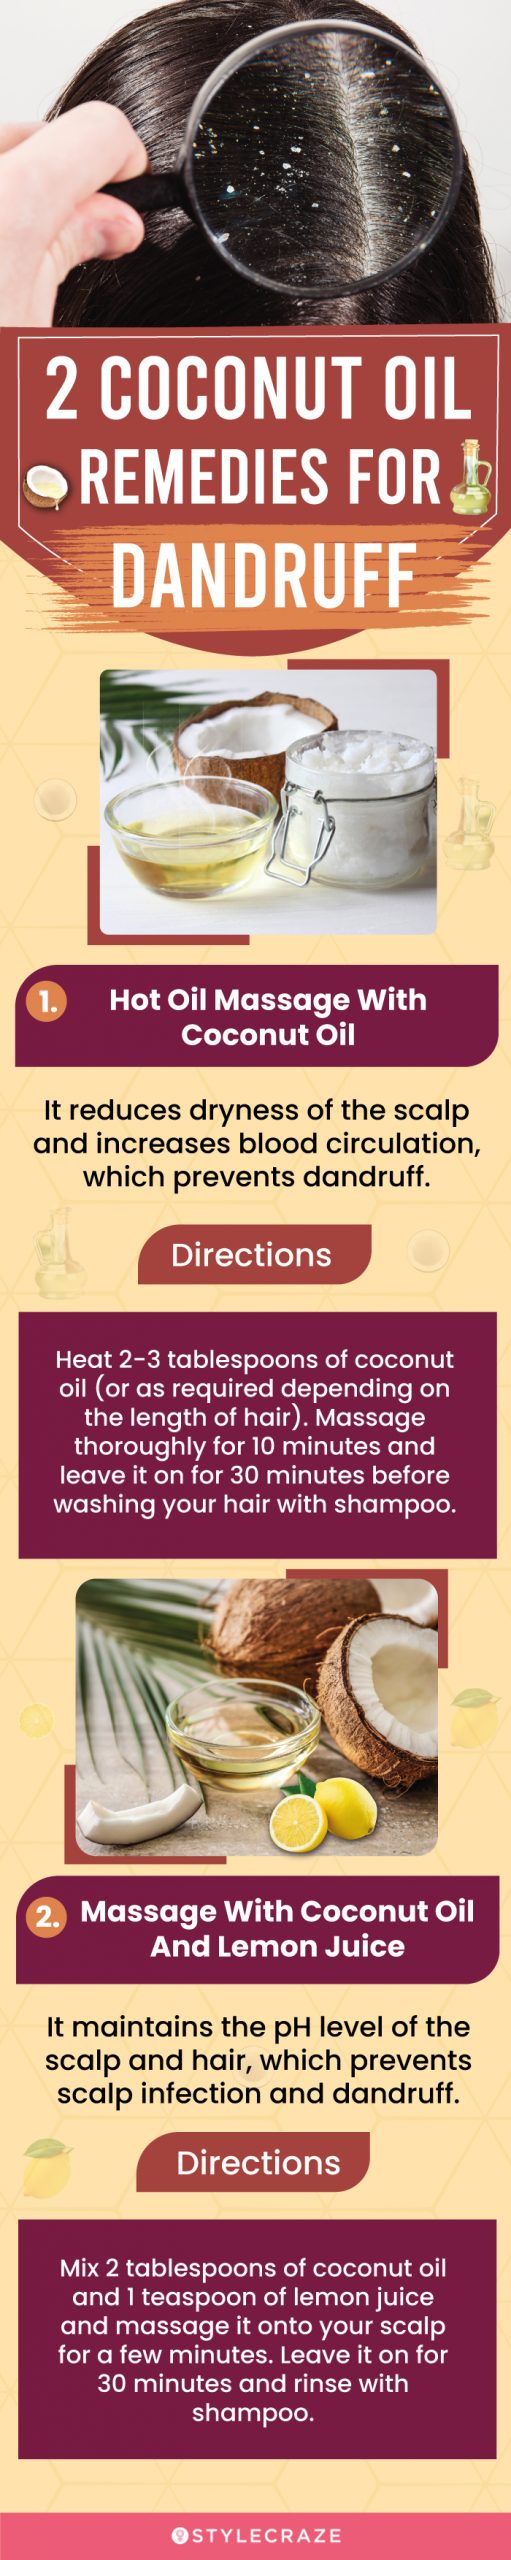 2 coconut oil remedies for dandruff (infographic)